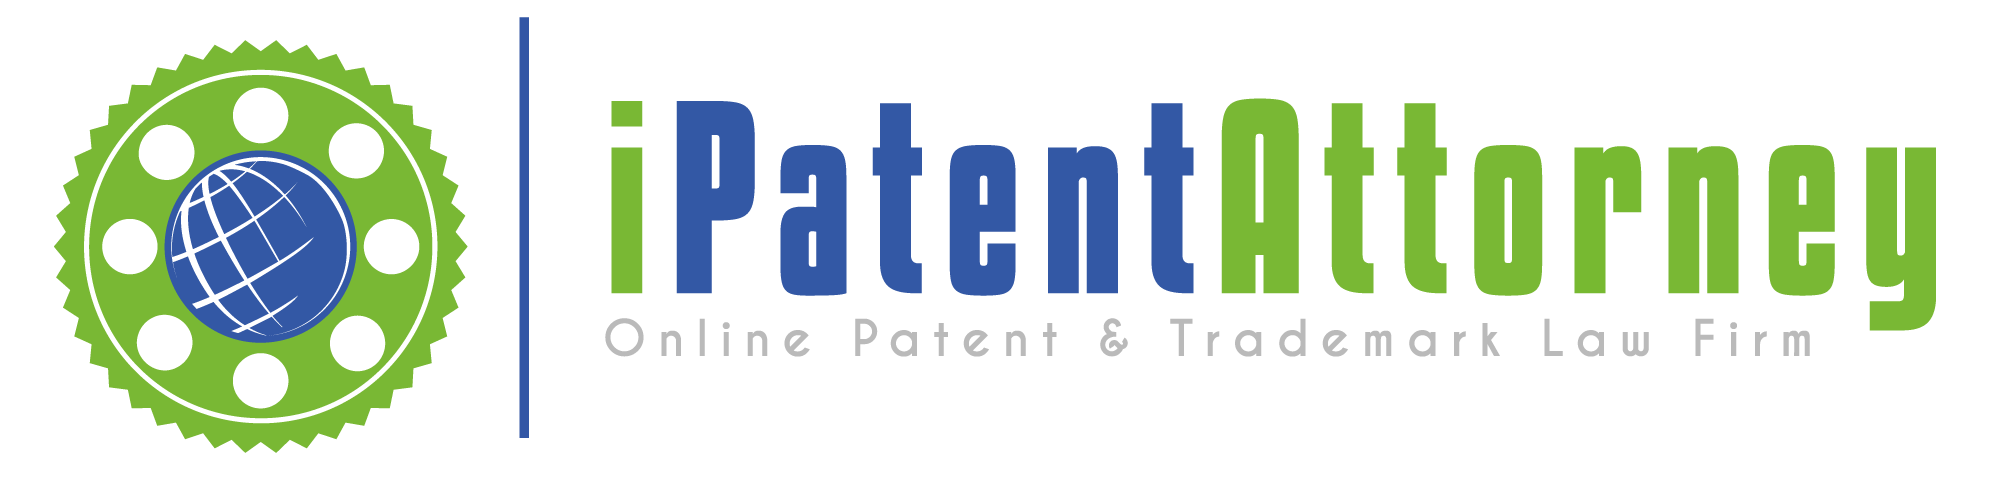 Online Patent Law Firm